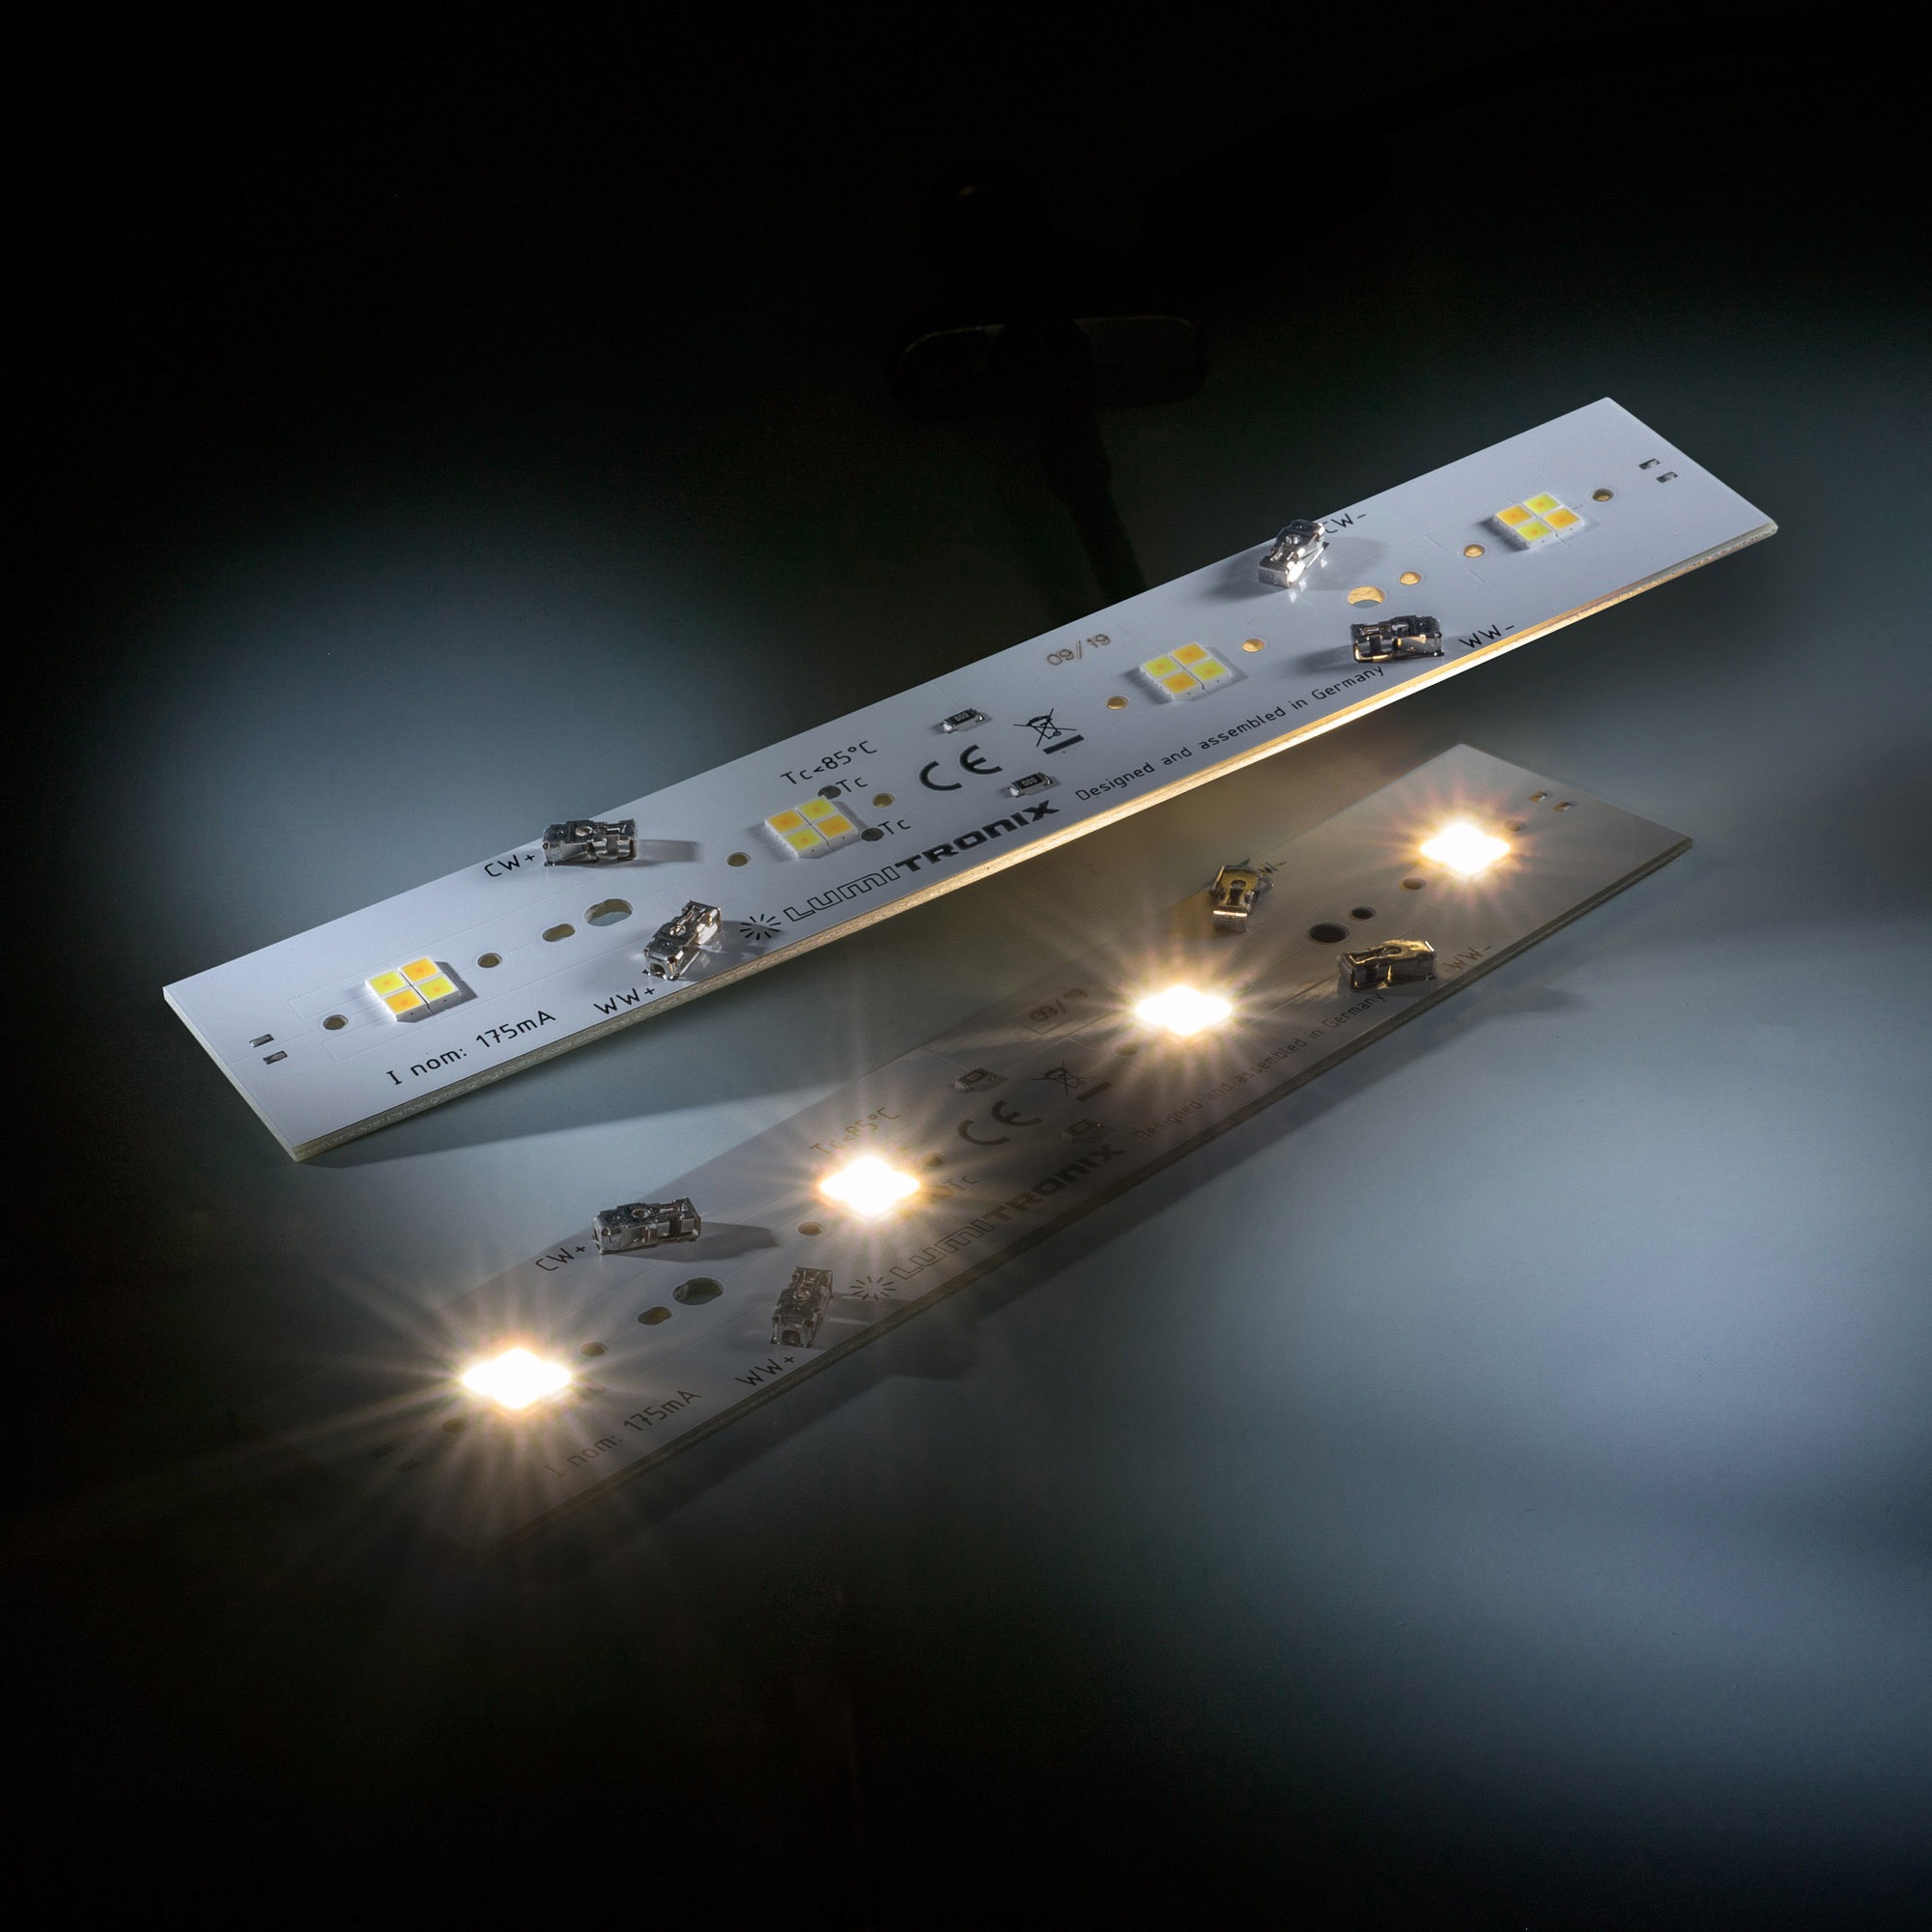 Daisy 16 Nichia LED Strip Tunable White 2700-4000K 360+340lm 175mA 11.5V 16 LEDs 16cm module (up to 4375lm/m and 25W/m)